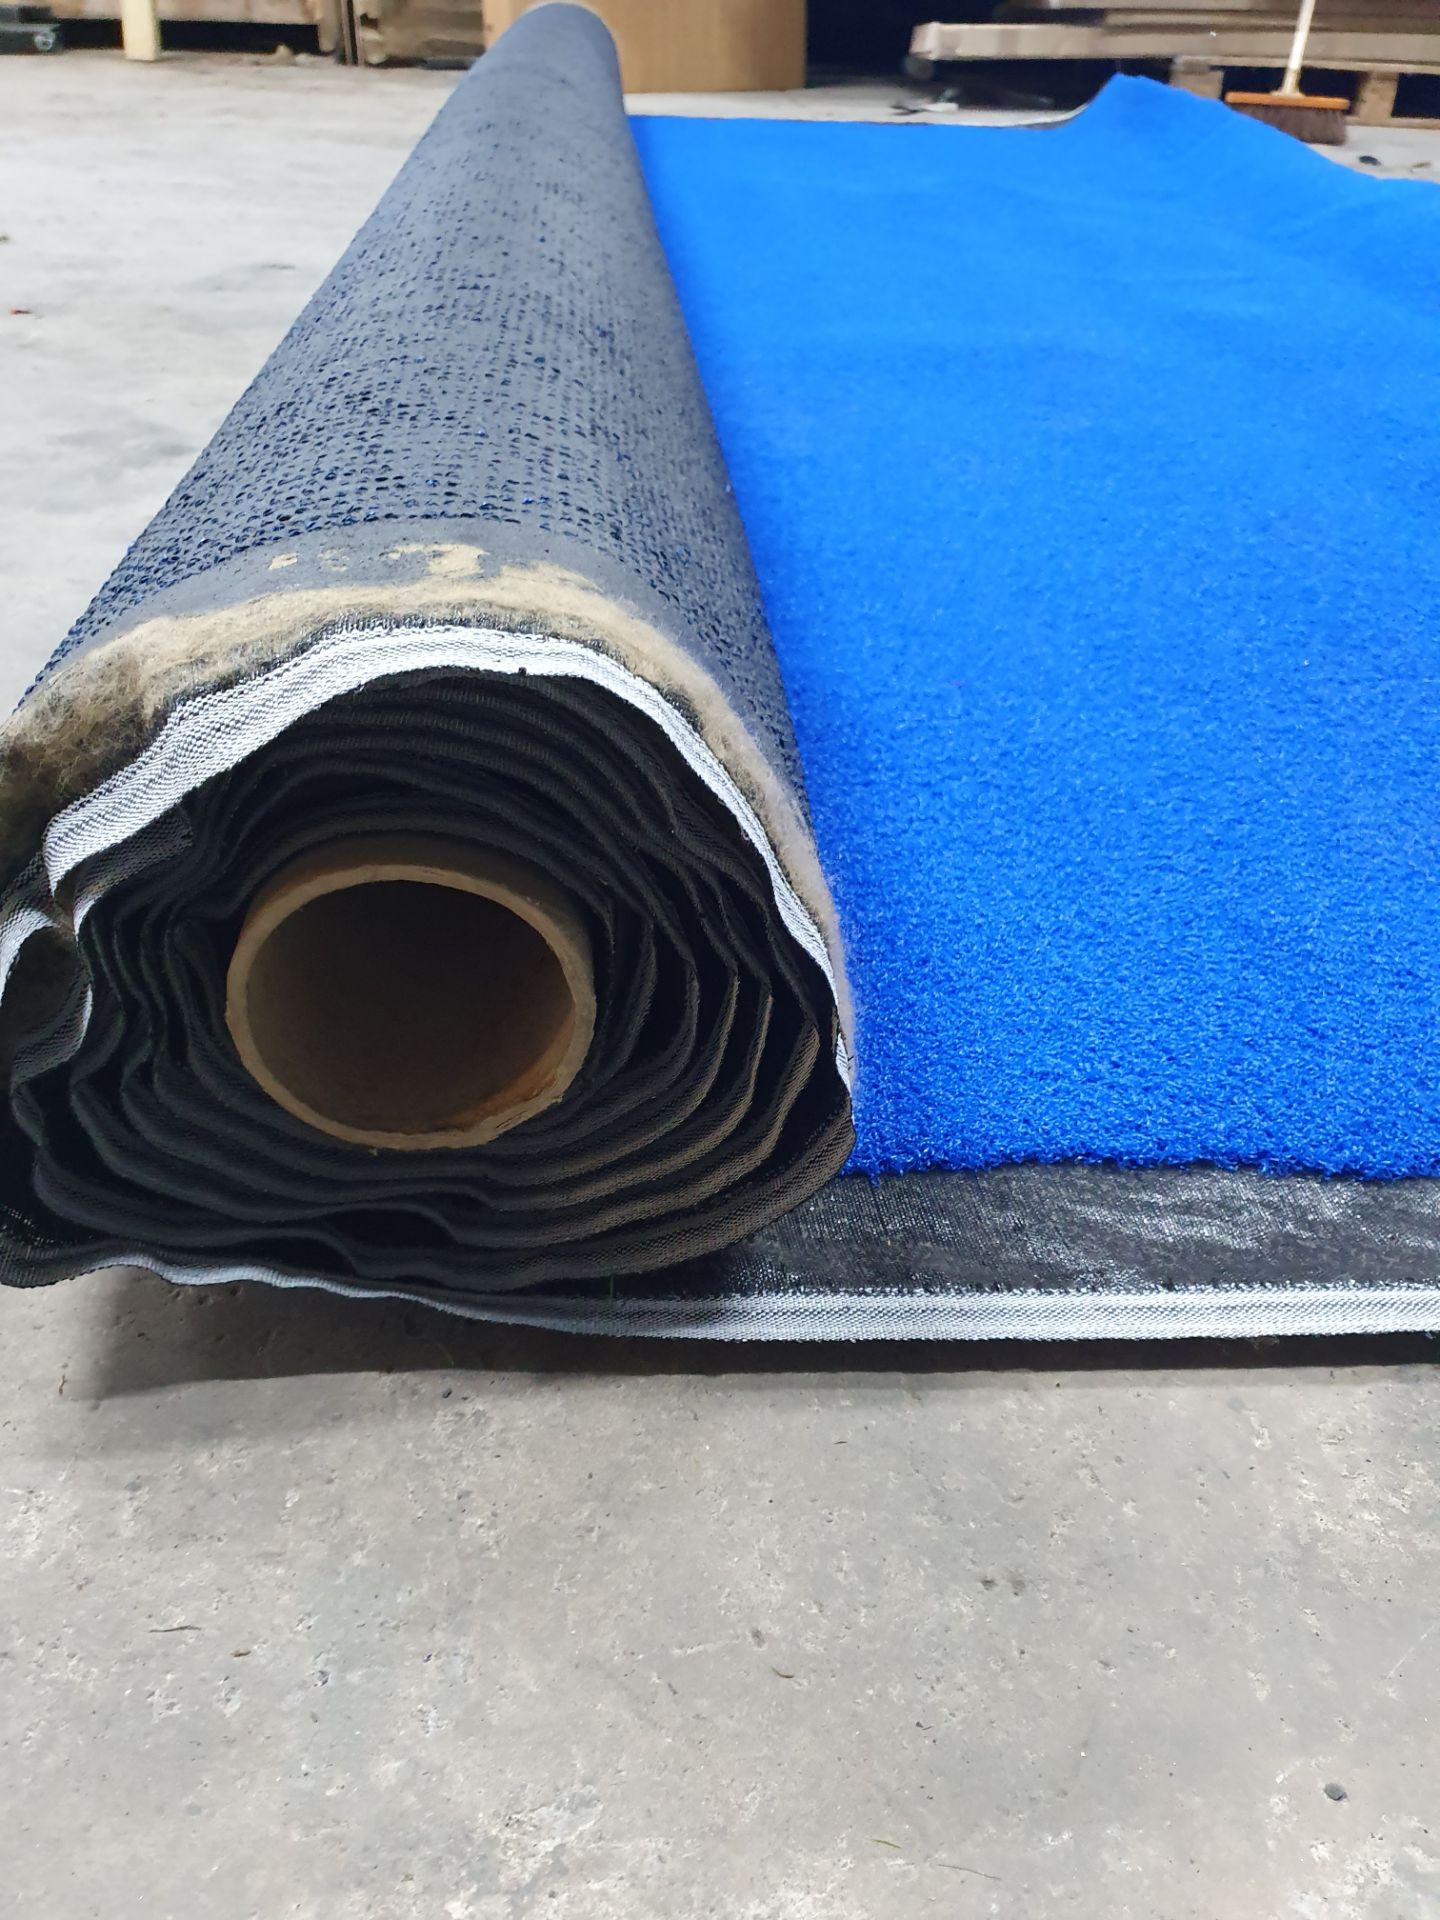 Roll of Blue Artificial Grass | Approximate size: 4m x 8m - Image 2 of 2